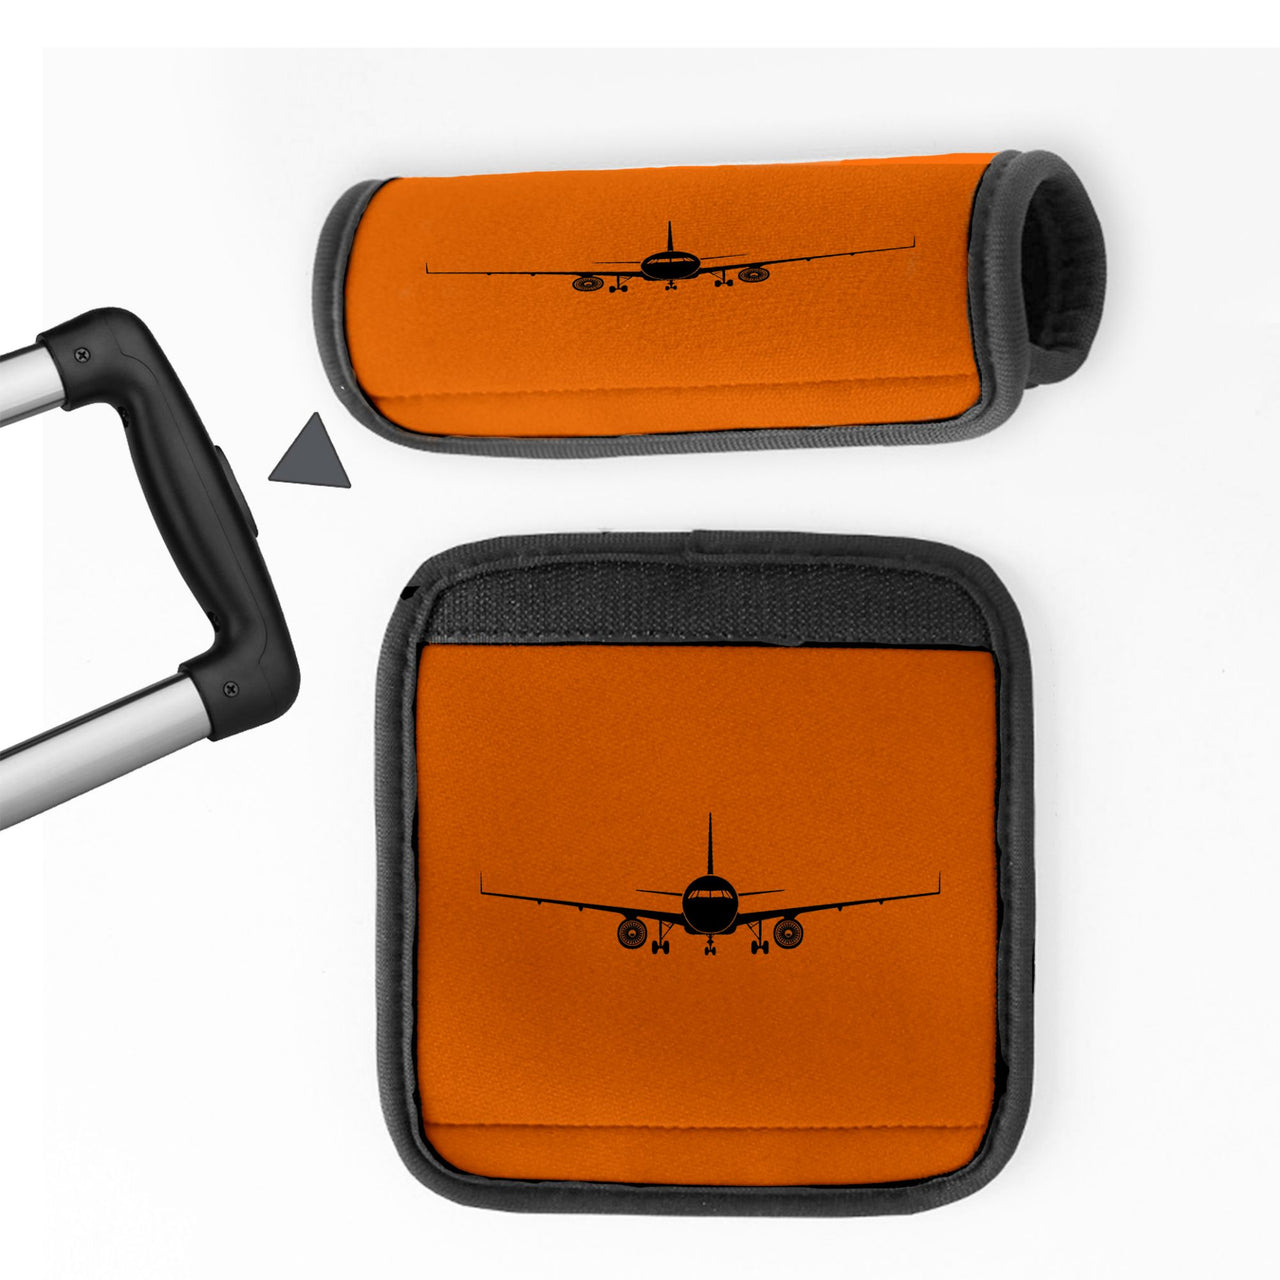 Airbus A320 Silhouette Designed Neoprene Luggage Handle Covers